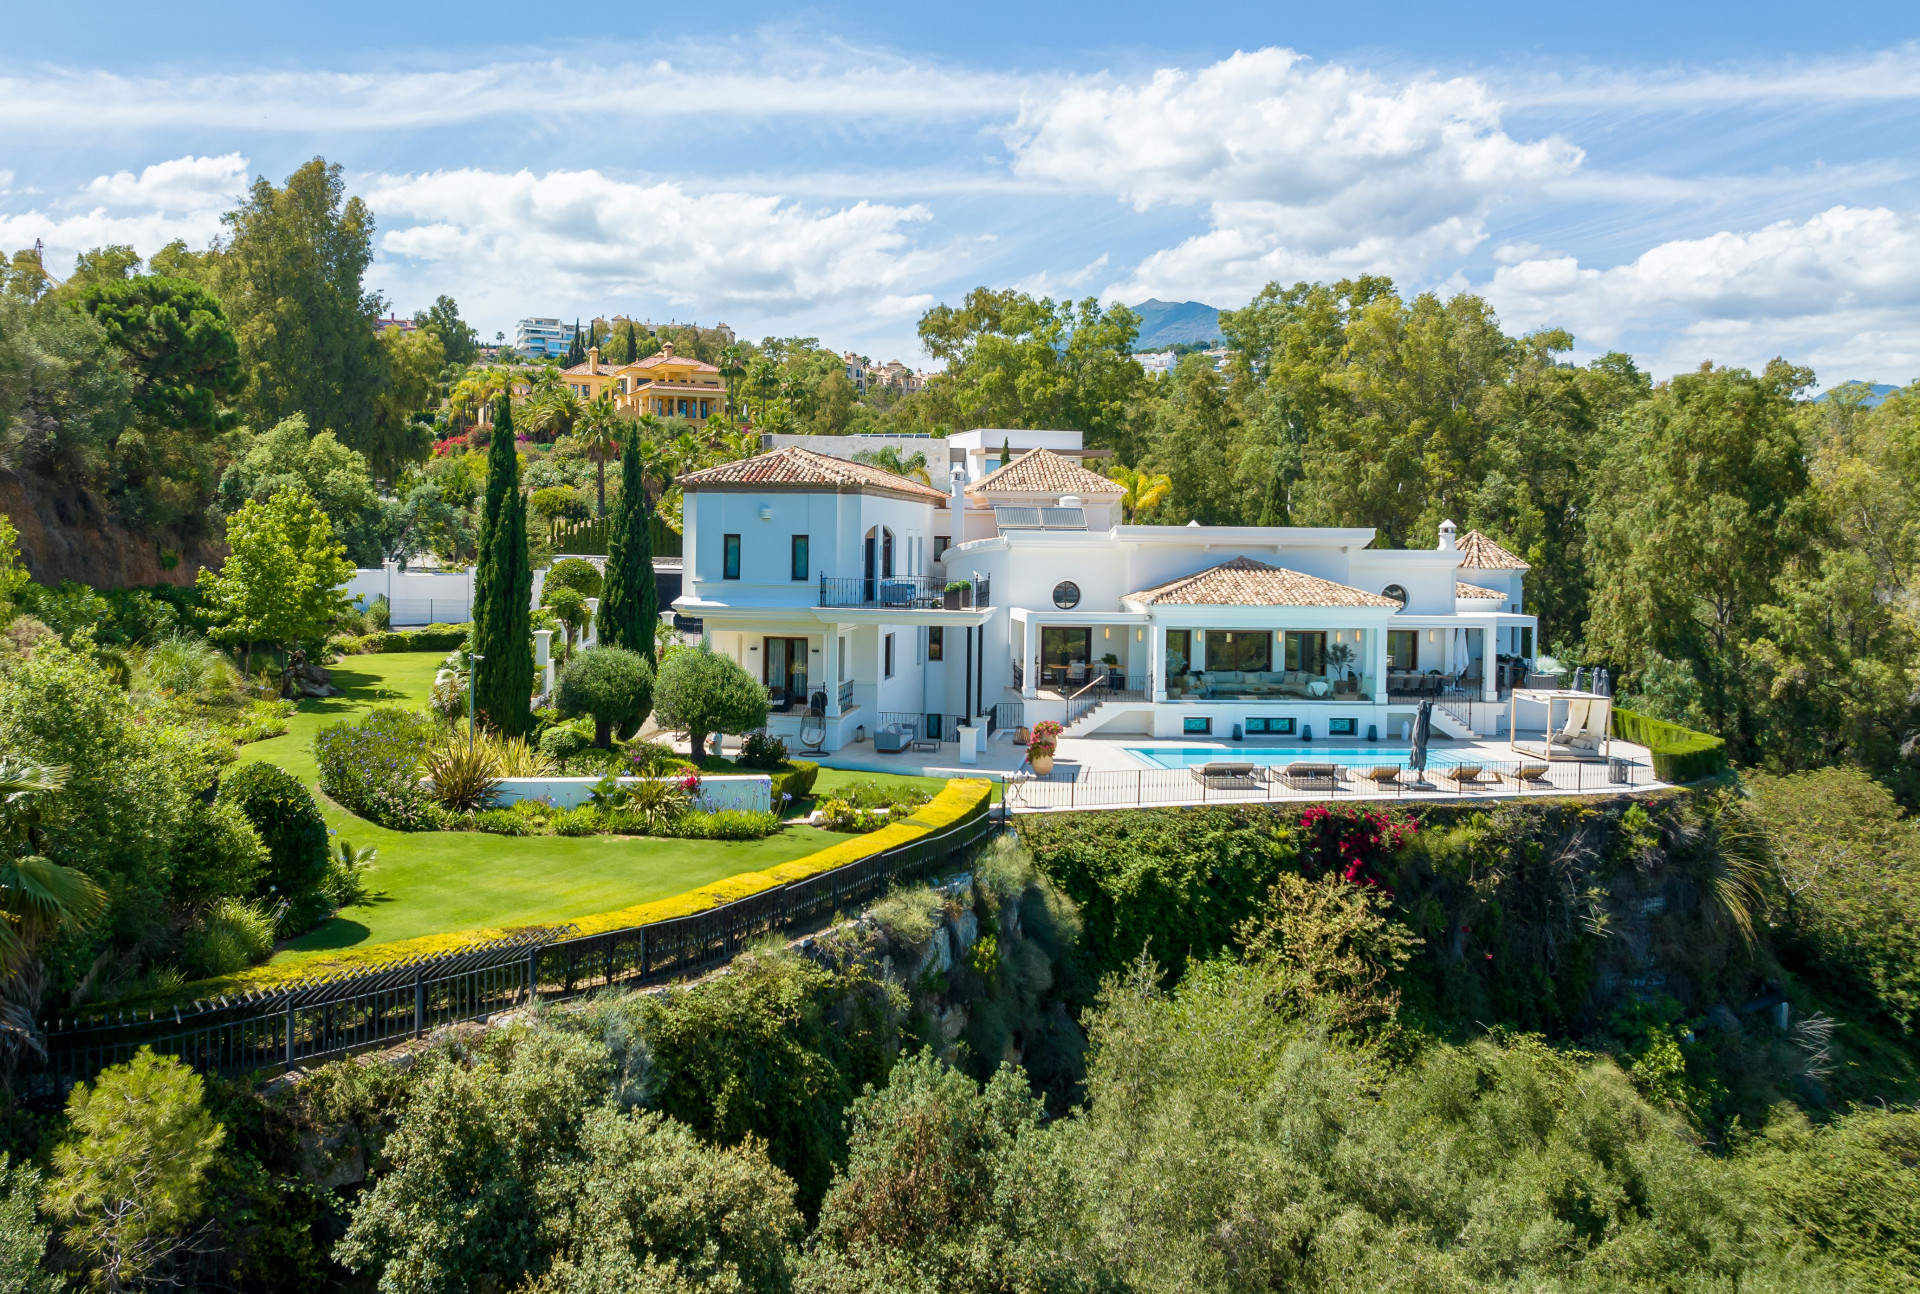 A truly exquisite villa in a secluded position with awe-inspiring sea and mountain views